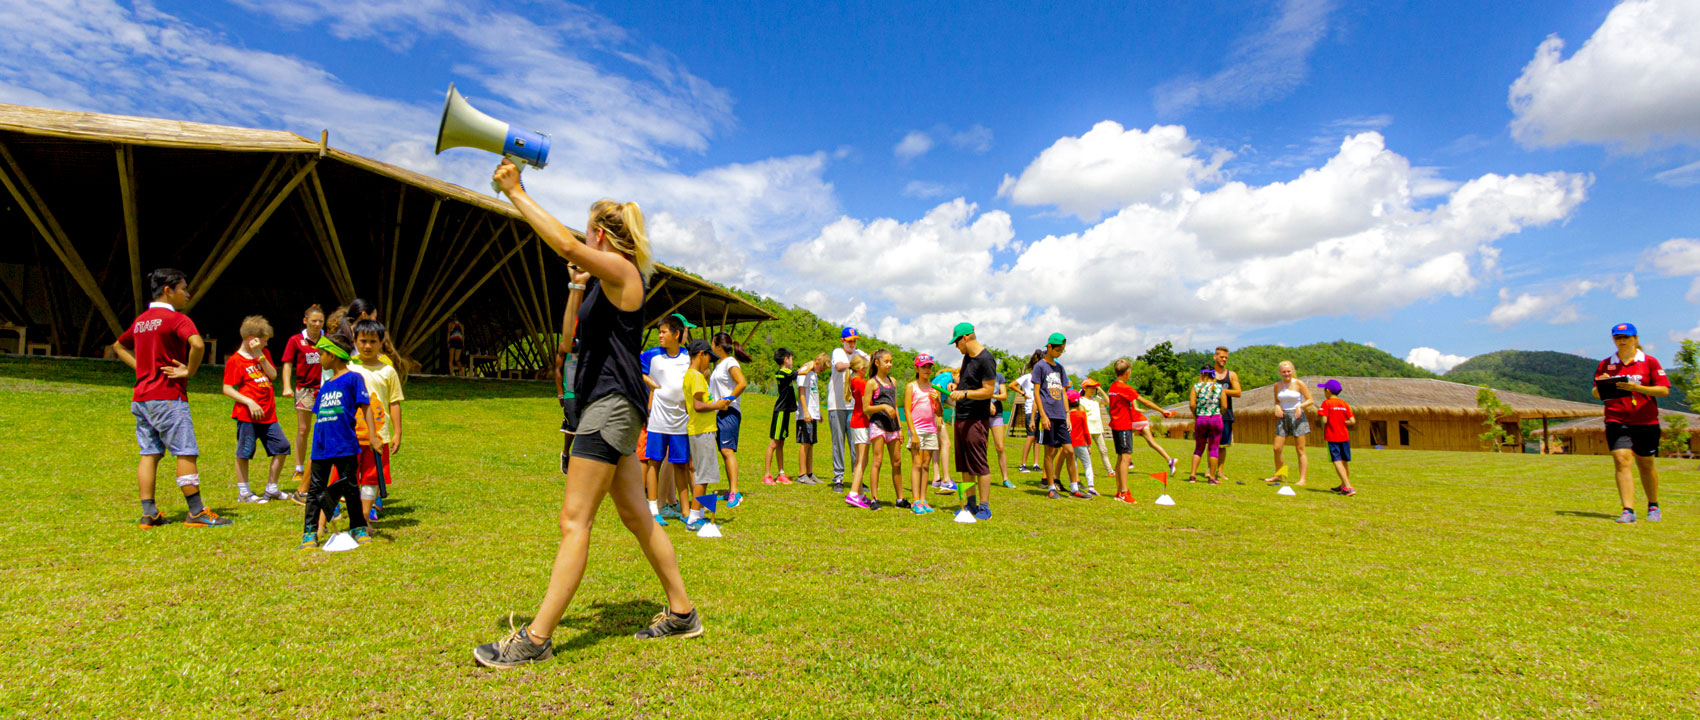 Thailand outdoor activity for kids